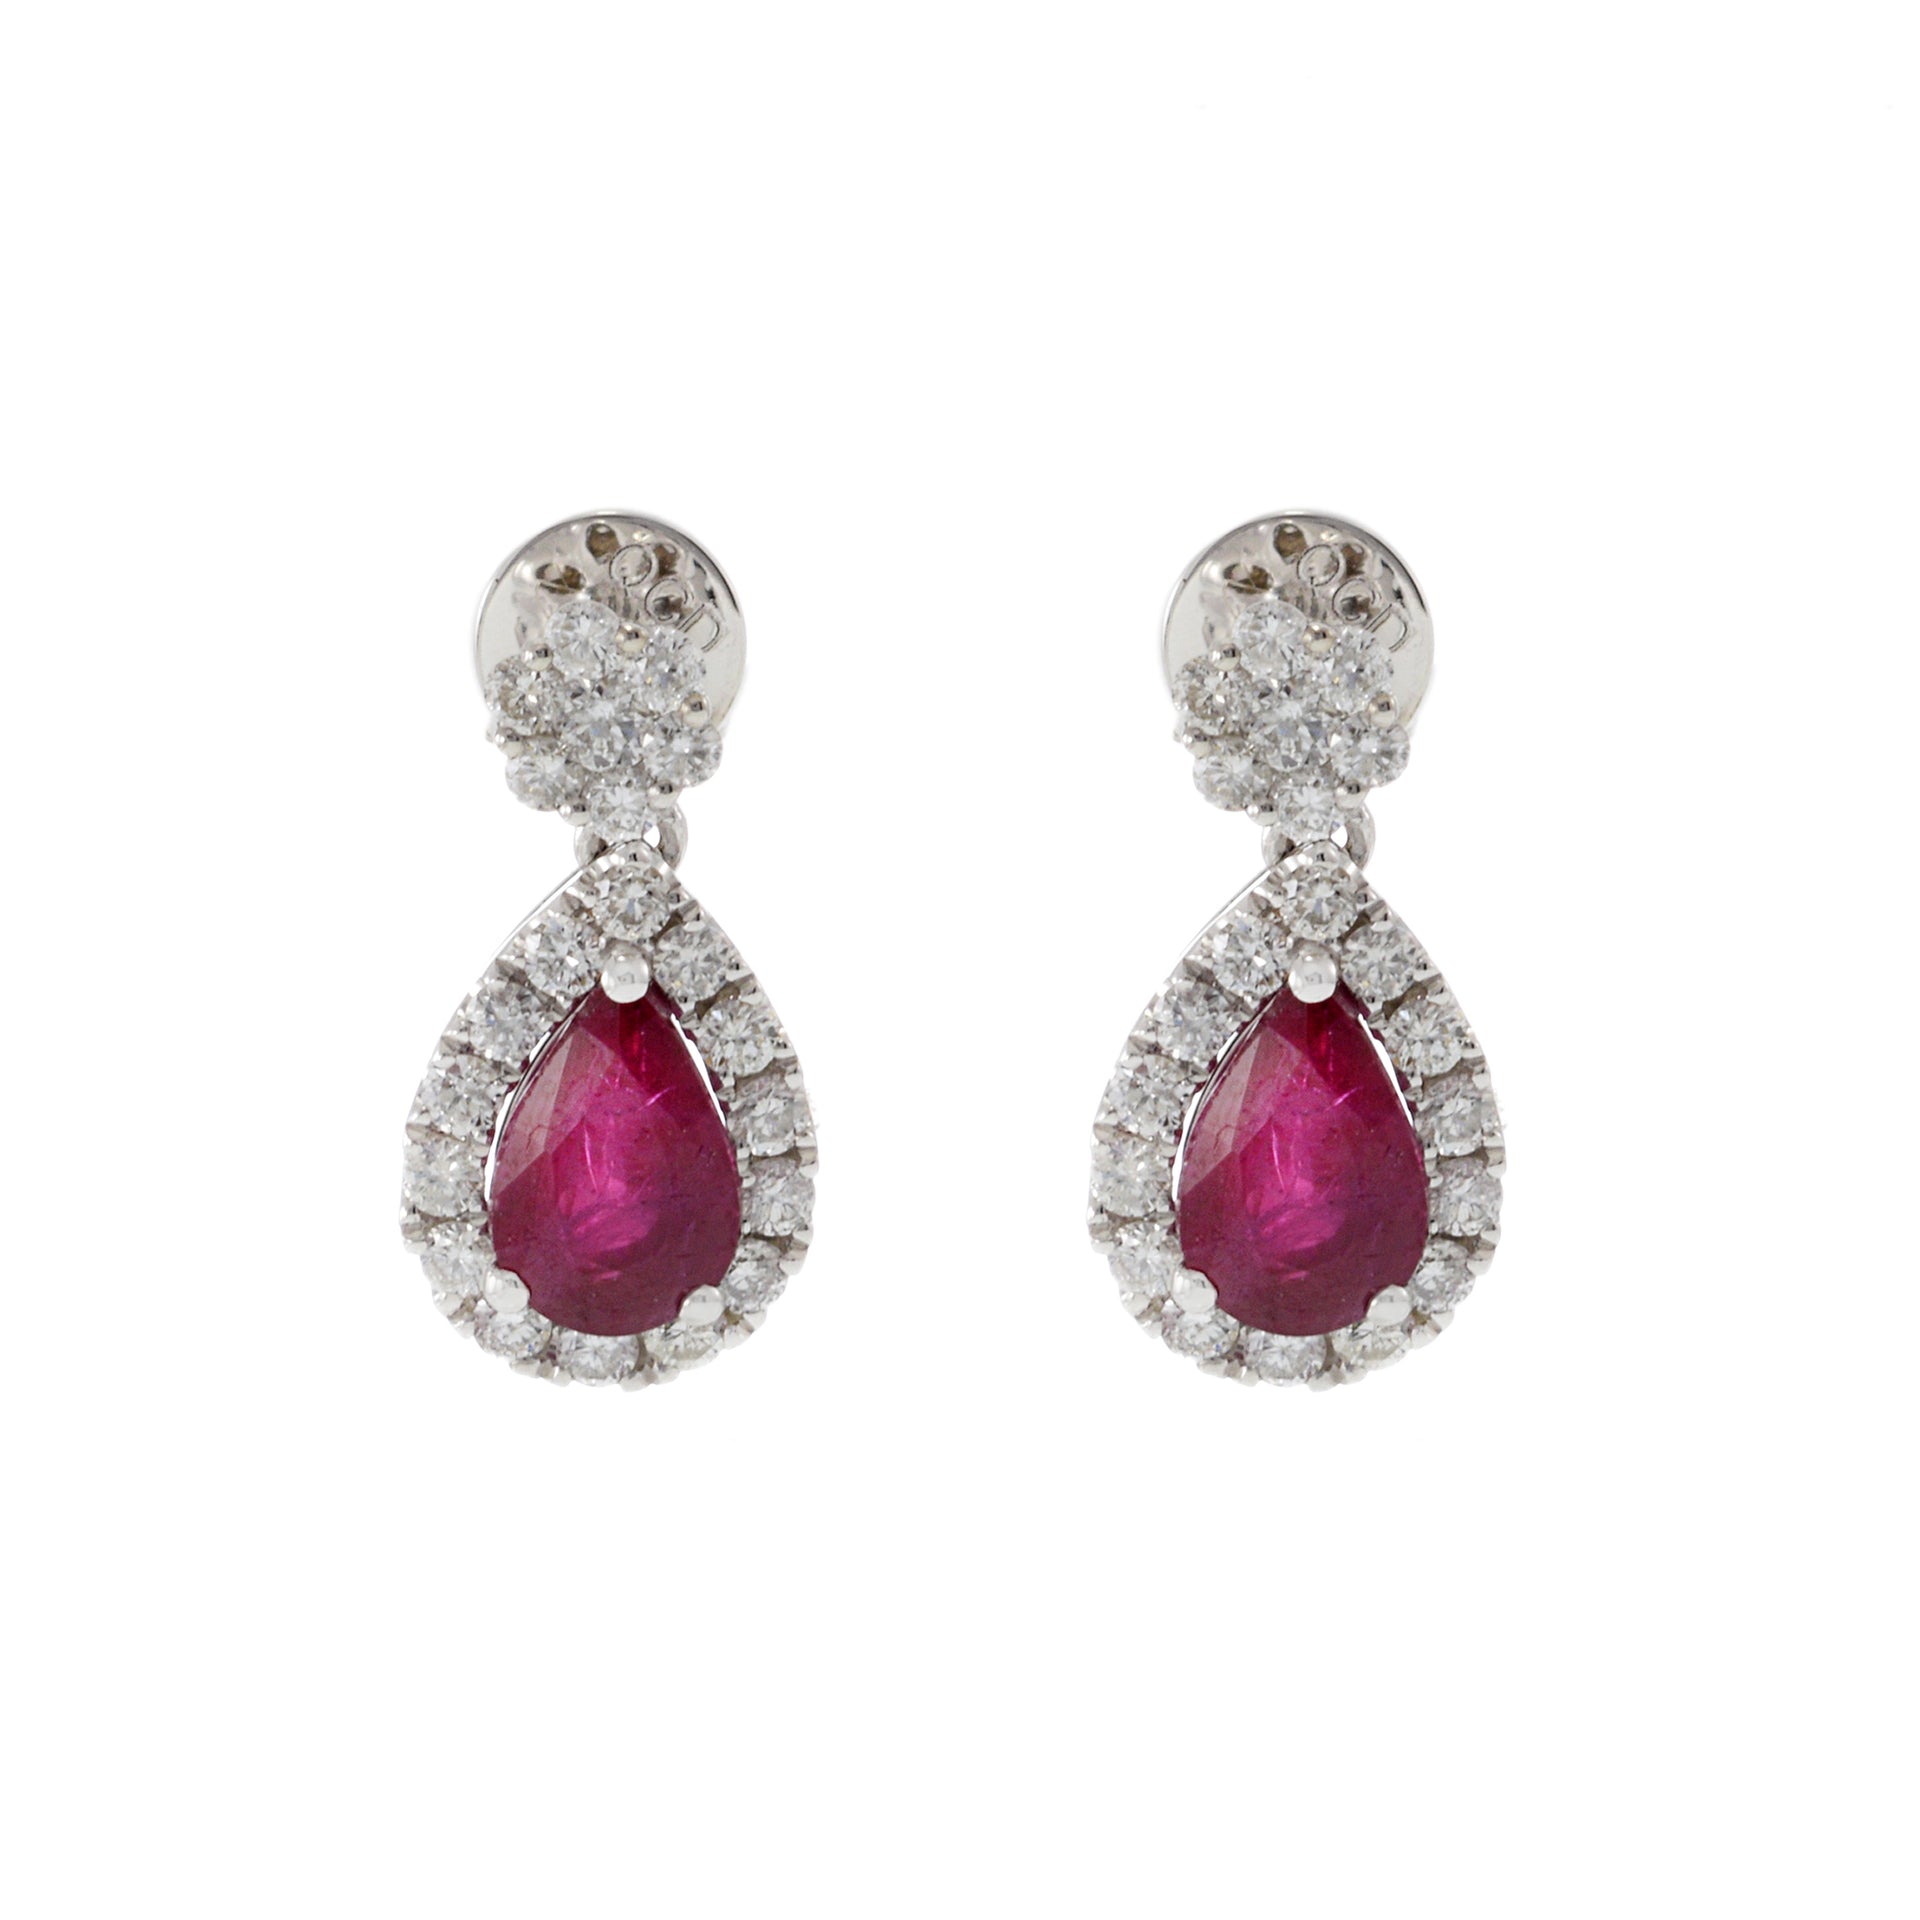 14KT White Gold Ruby and Diamond Earrings